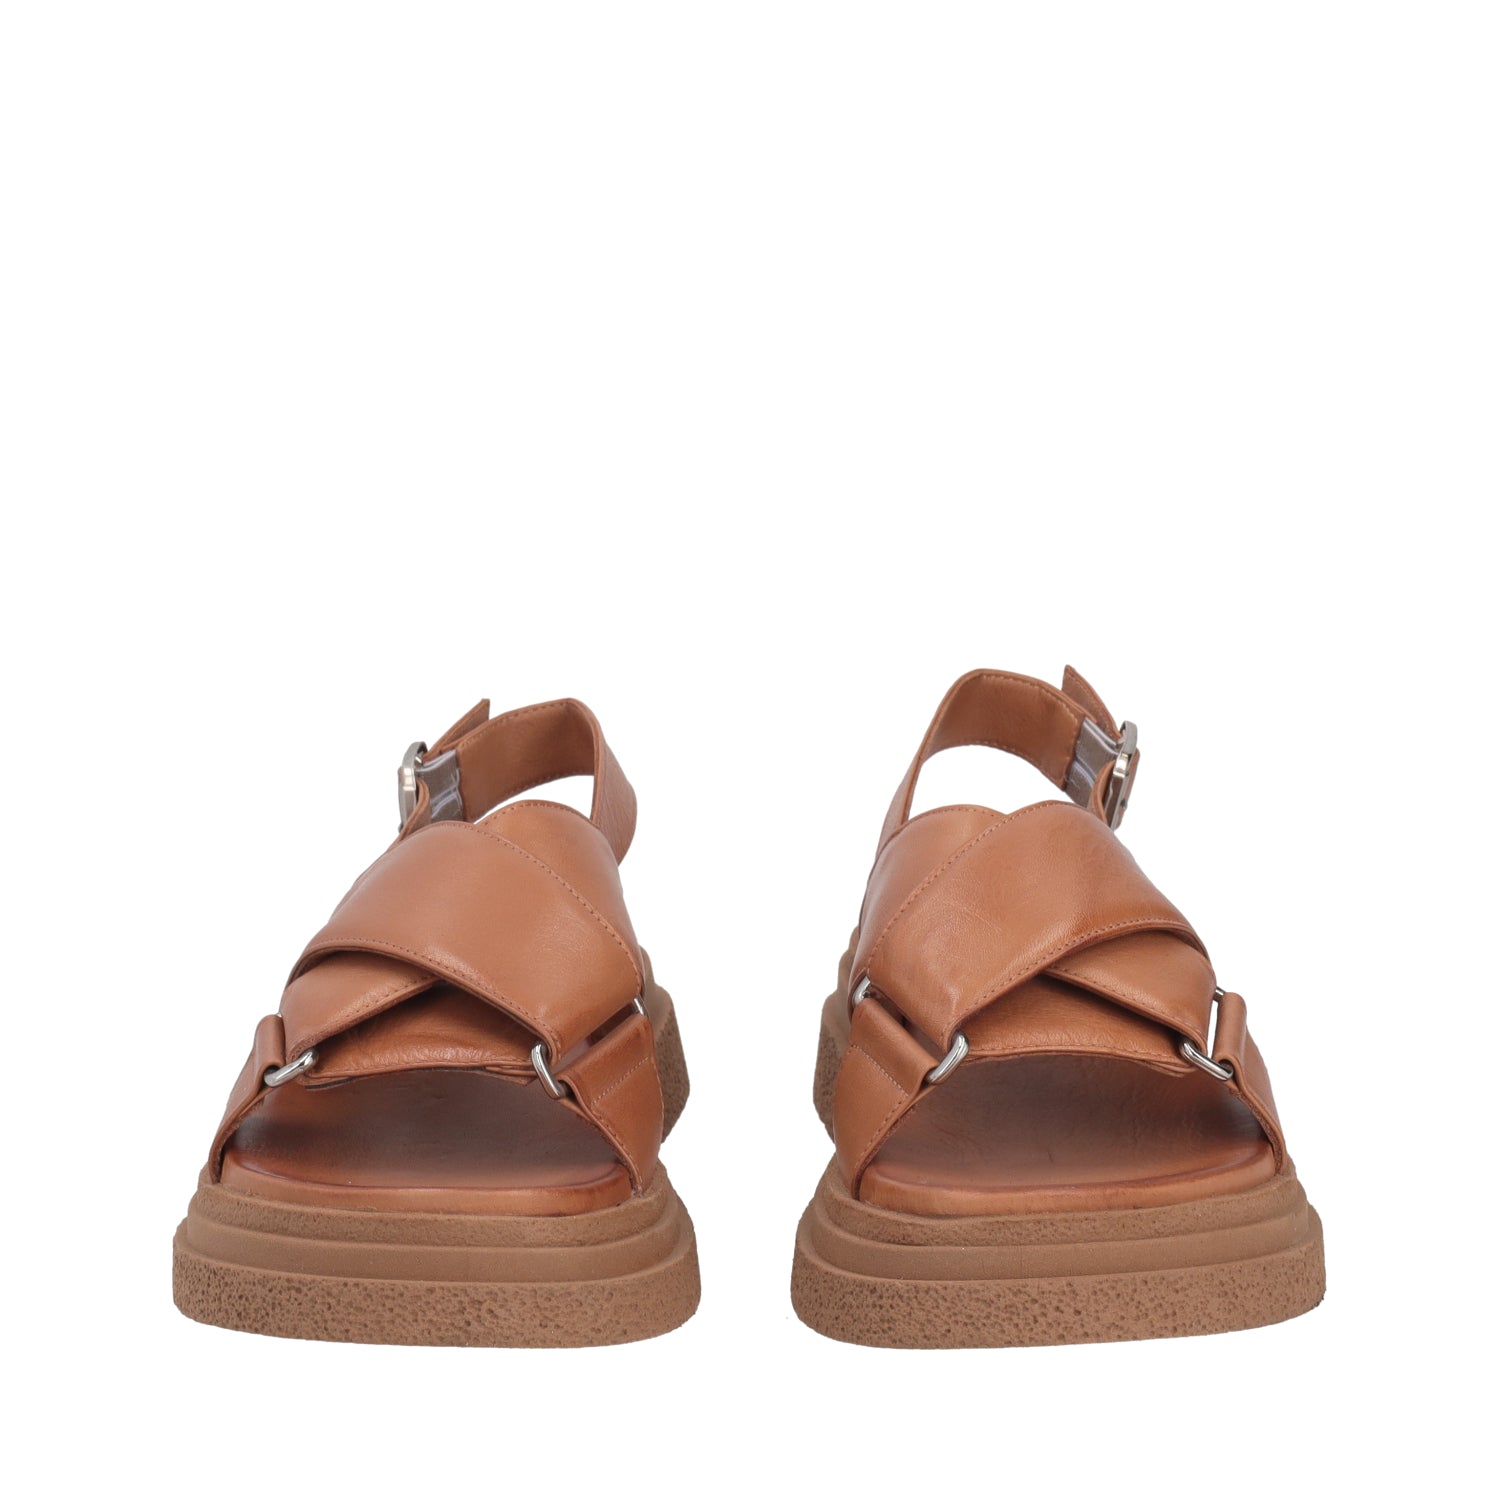 TAN MARTINA SANDAL WITH CROSSED STRAPS